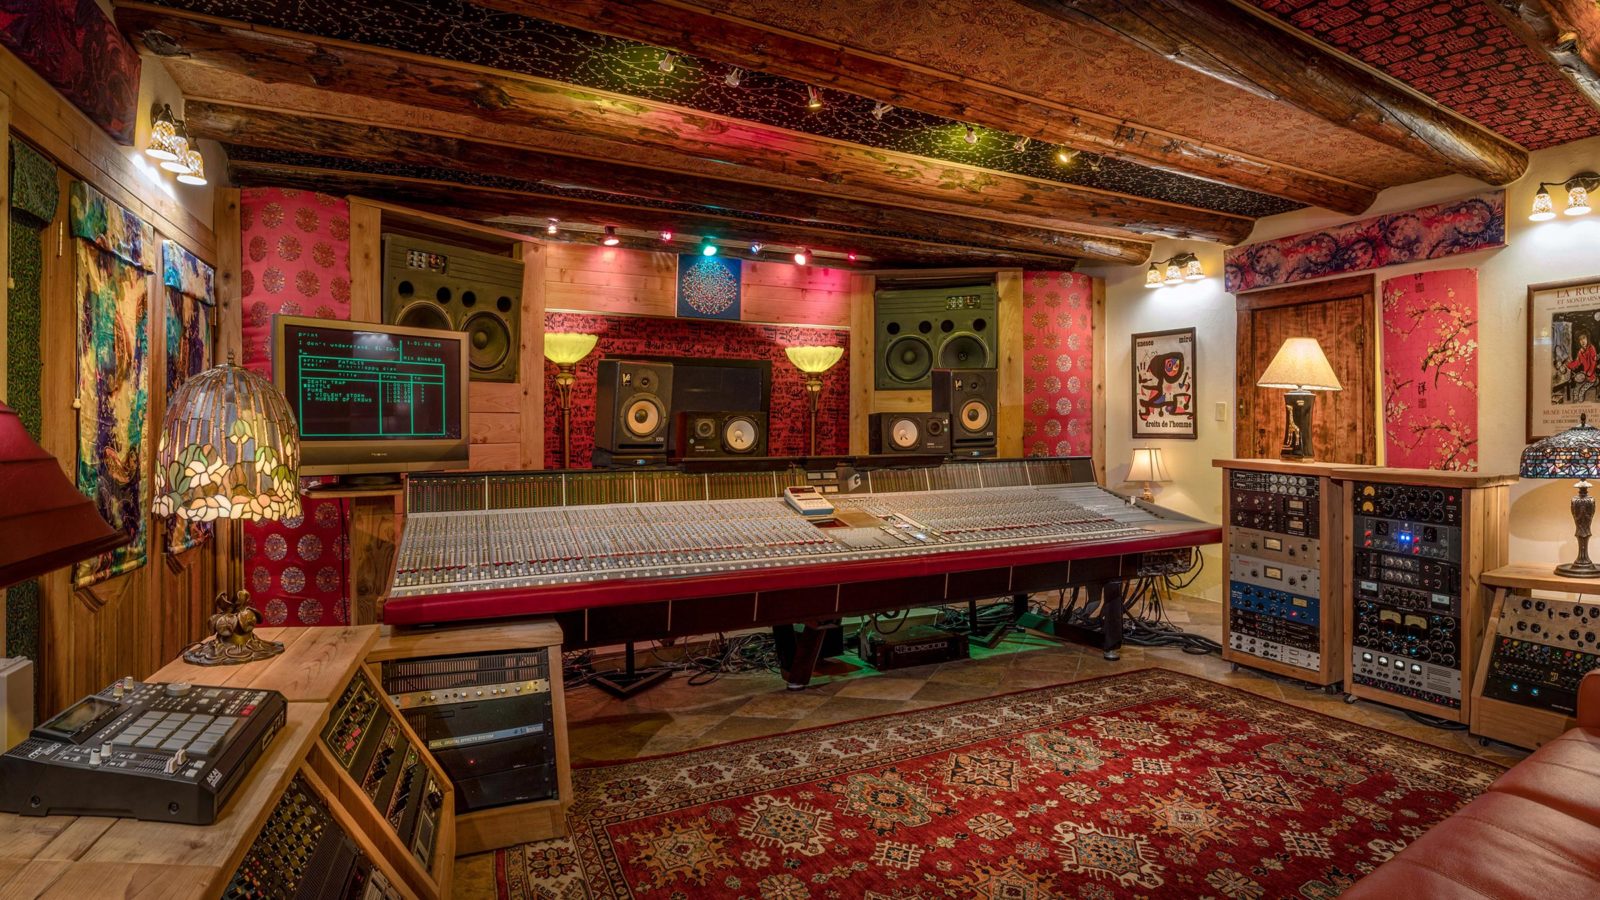 Mix Room from left